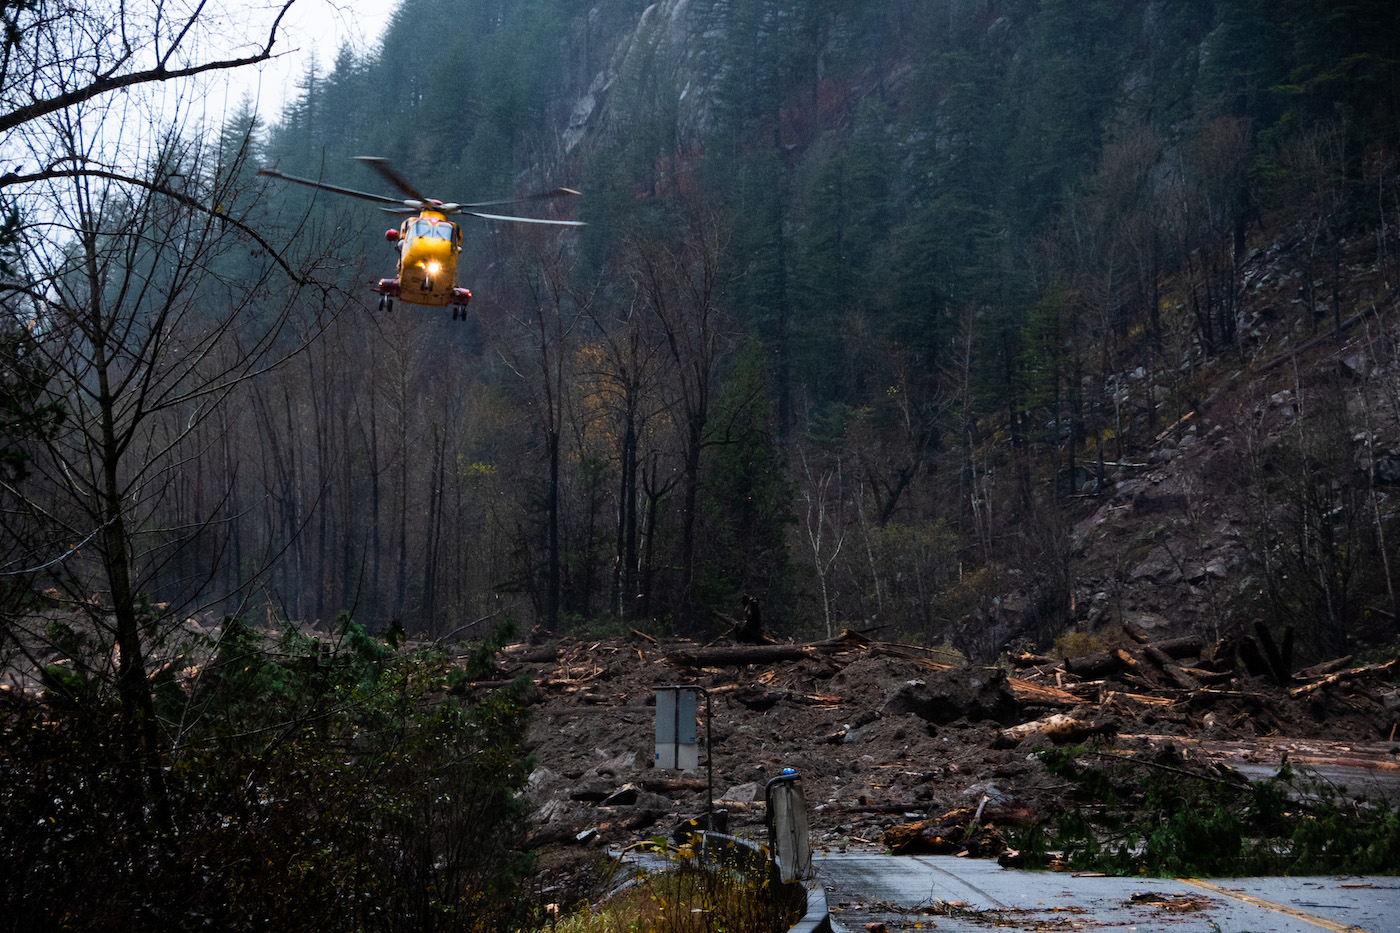 A Royal Canadian Air Force helicopter evacuated 311 people plus animals from a blocked road after a landslide near Agassiz, British Columbia on November 16, 2021. Every highway and rail line linking coastal BC to the rest of Canada washed out in November after an ‘atmospheric river’ — an extended storm linked to climate change — dumped a month’s worth of rain on southern BC in just two days.